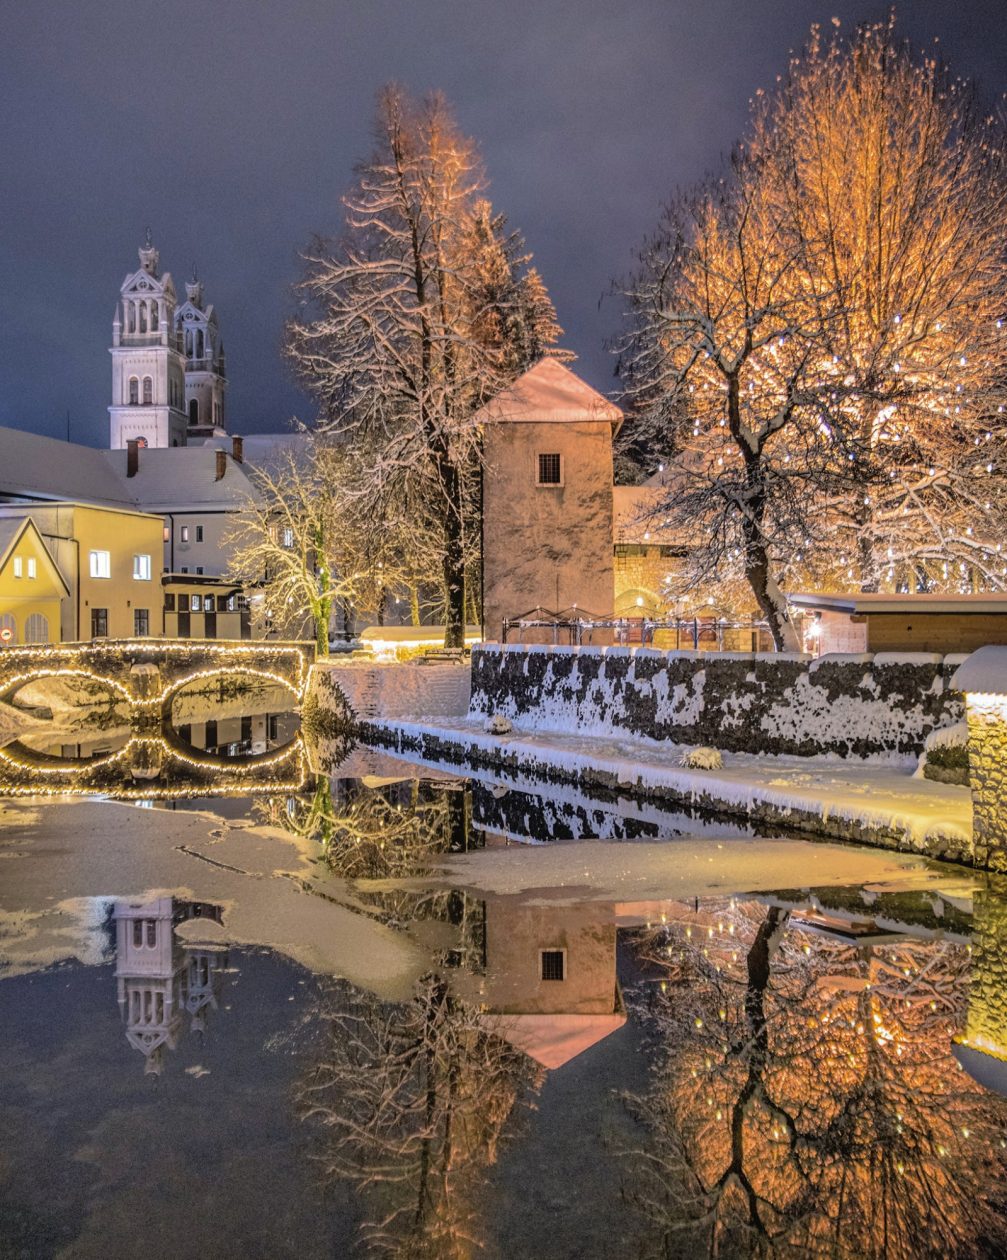 Town of Ribnica in Slovenia at night in the Christmas season